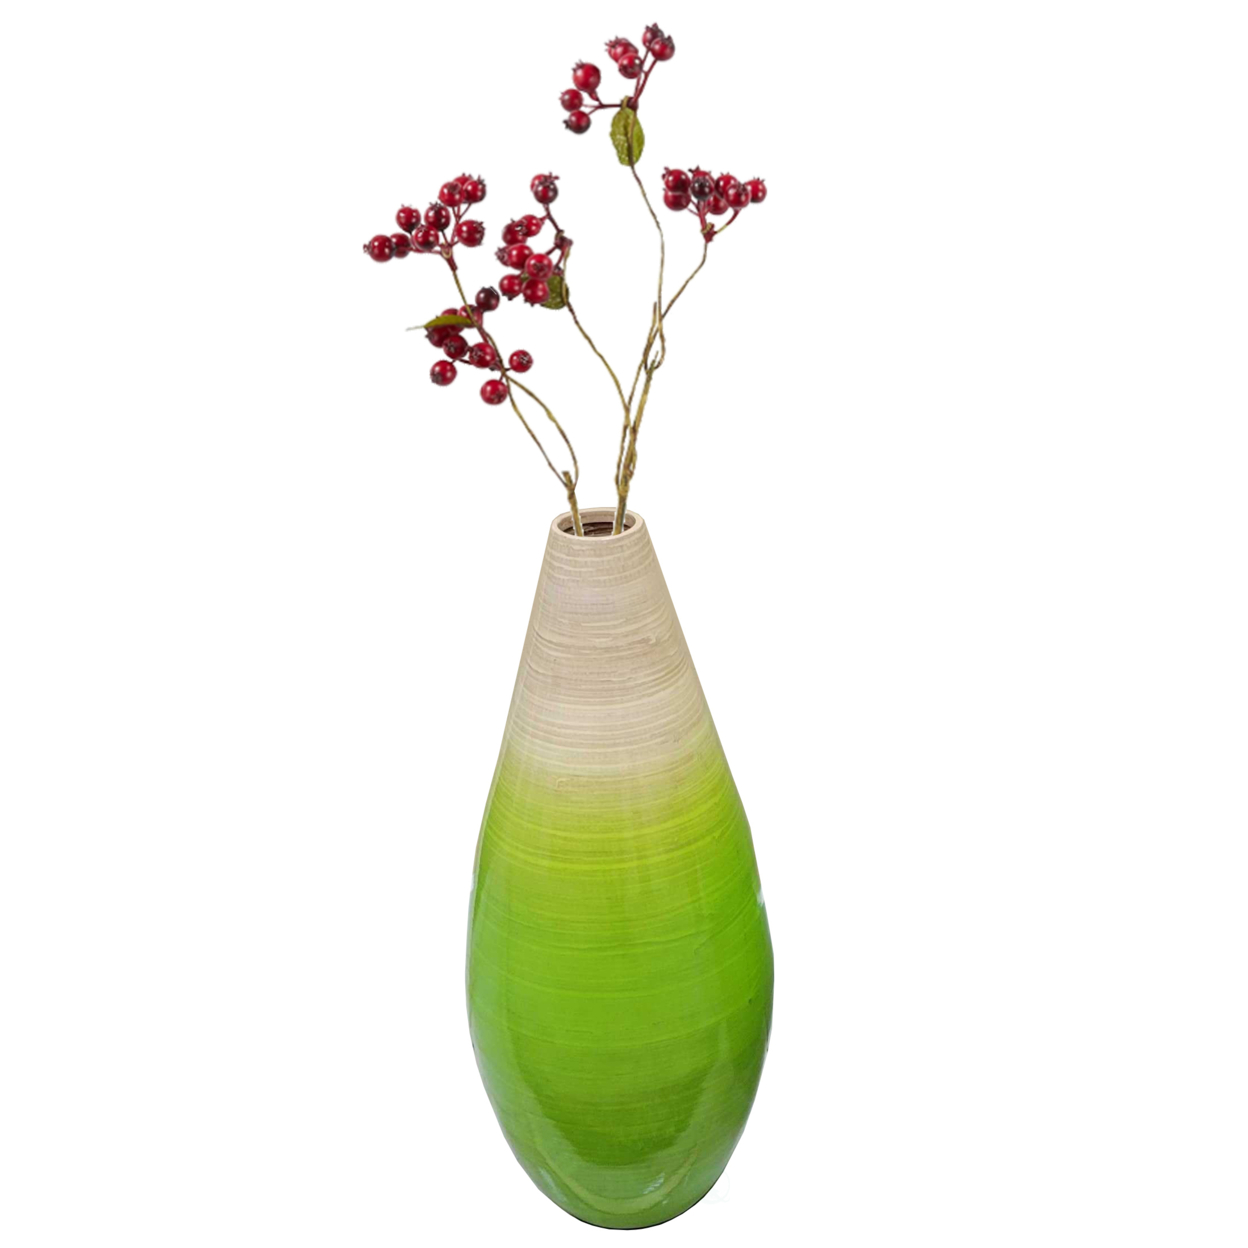 Contemporary Bamboo Floor Flower Vase Tear Drop Design For Dining, Living Room, Entryway Decoration, Green - Large